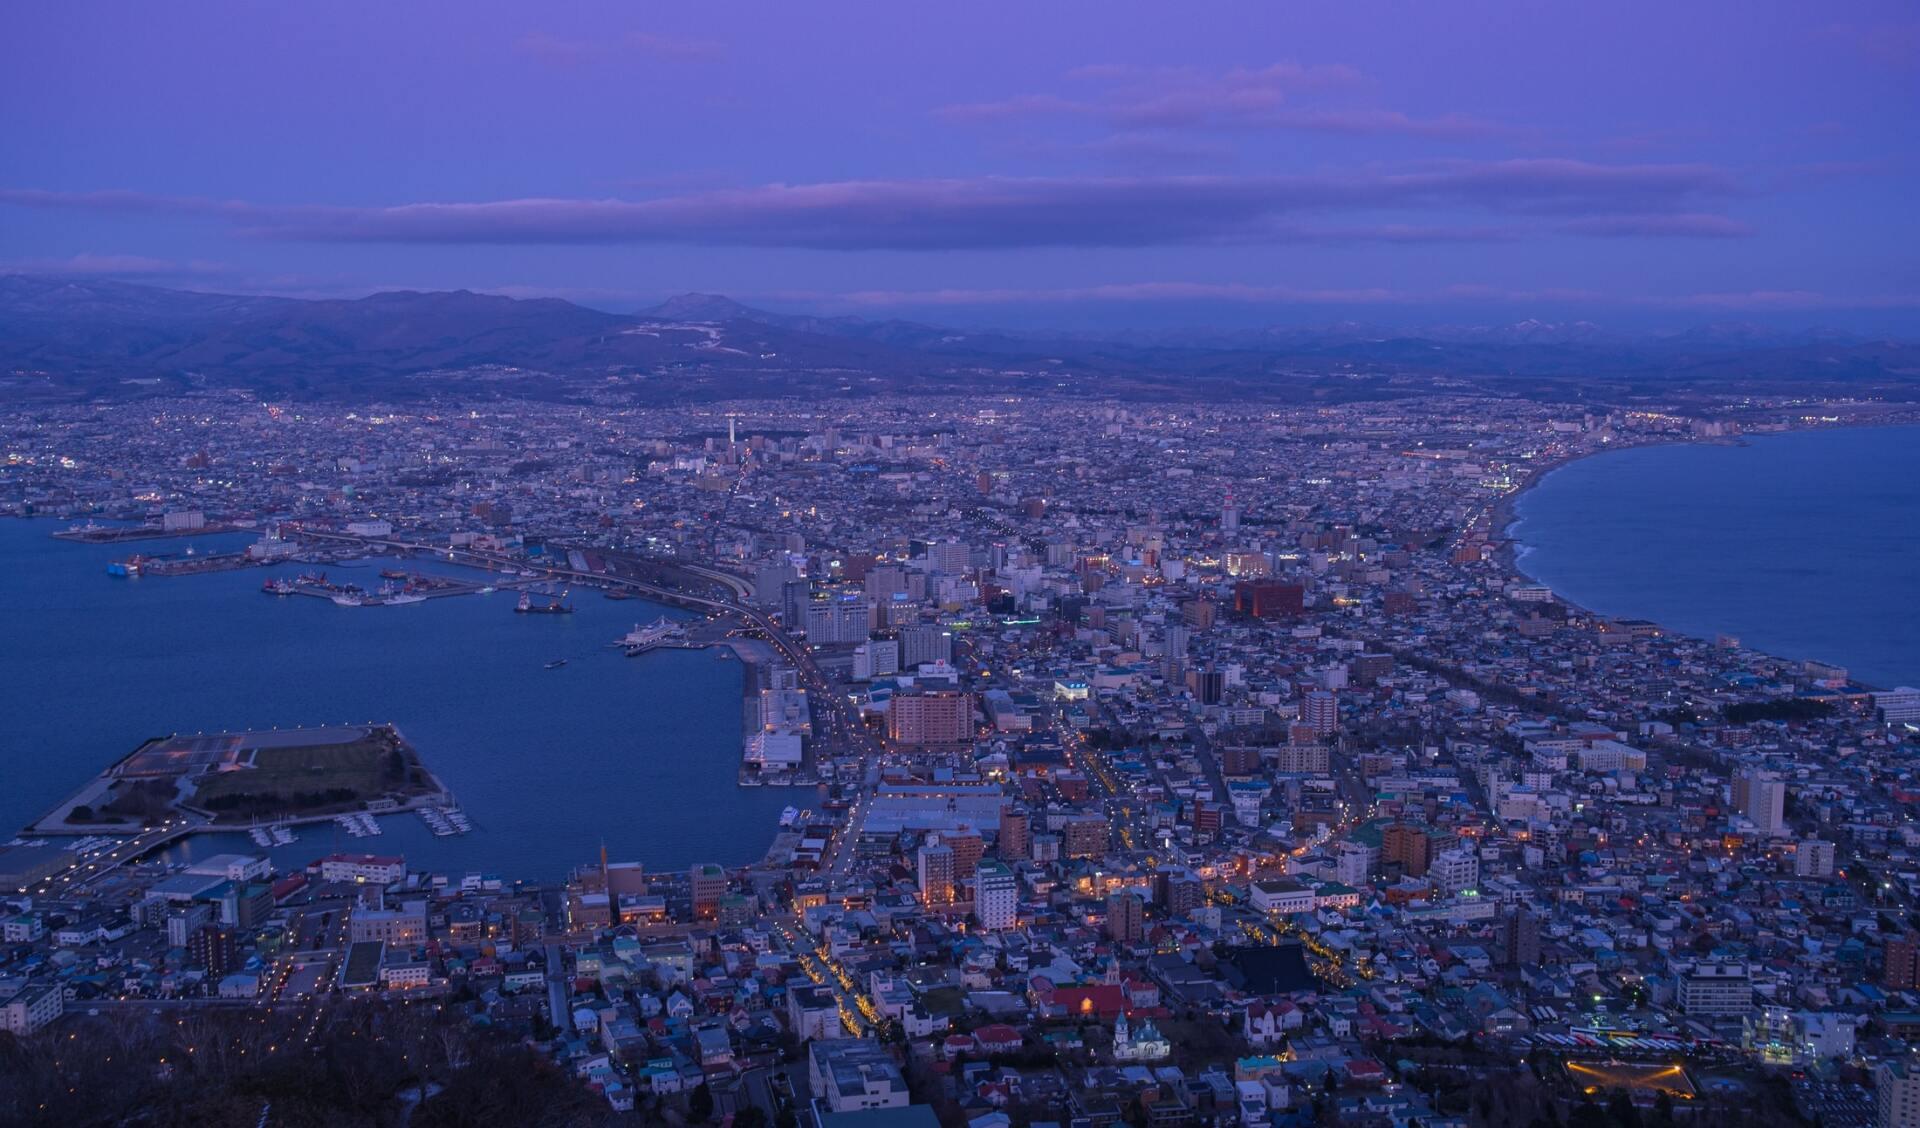 View of Hakodate city from the tower